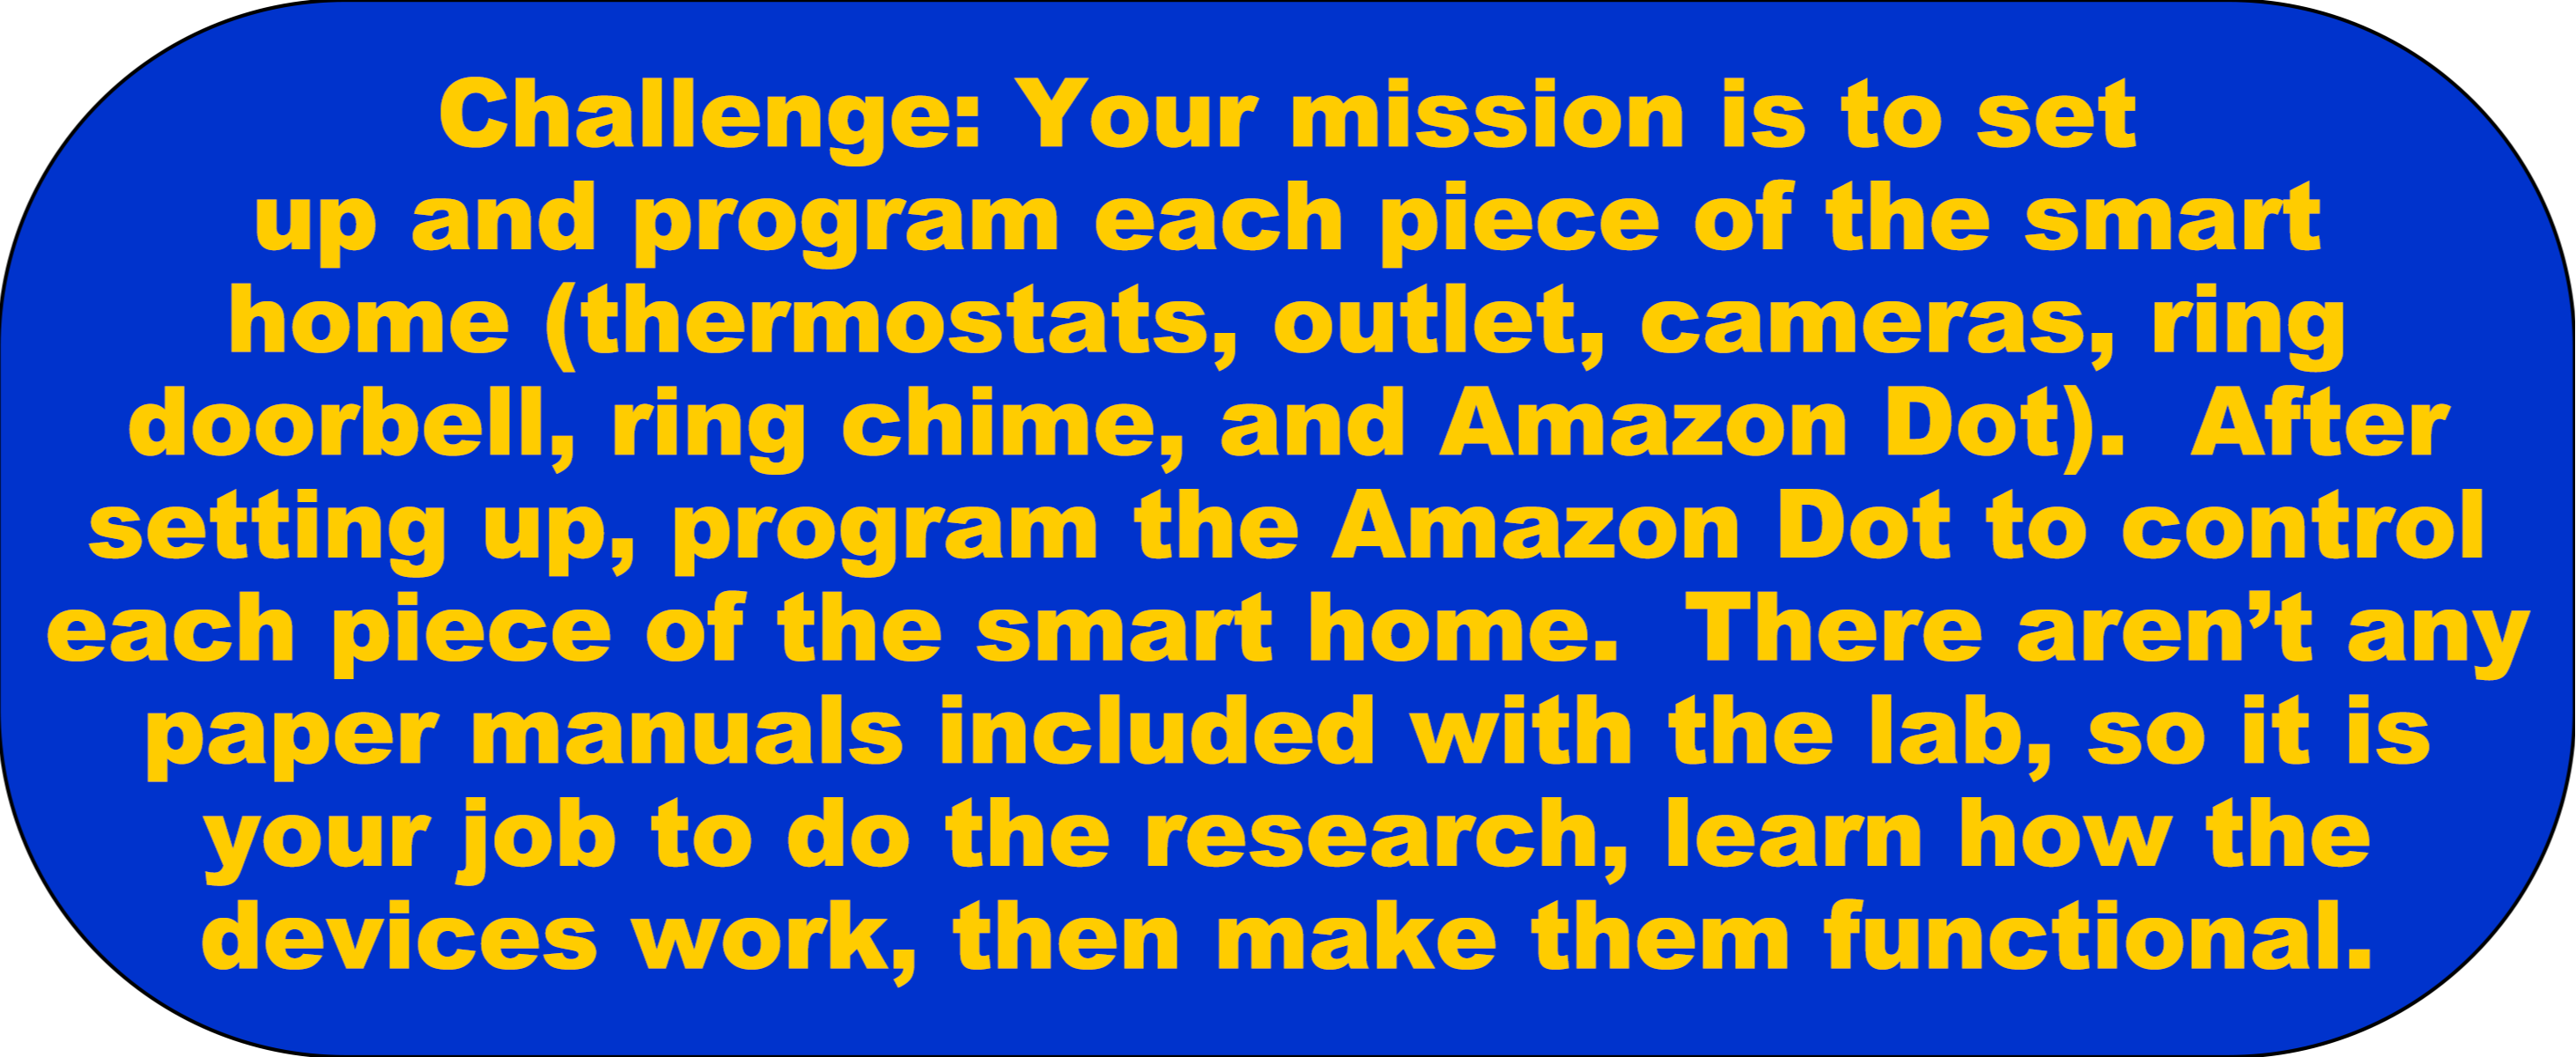 Challenge: Your mission is to set up and program each piece of the smart home (thermostats, outlet, cameras, ring doorbell, ring chime, and amazon dot). After set-up, program the Amazon Dot to control each piece of the smart home. There aren’t any paper manuals included with the lab, so it is your job to do the research, learn how the devices work, then make them functional.